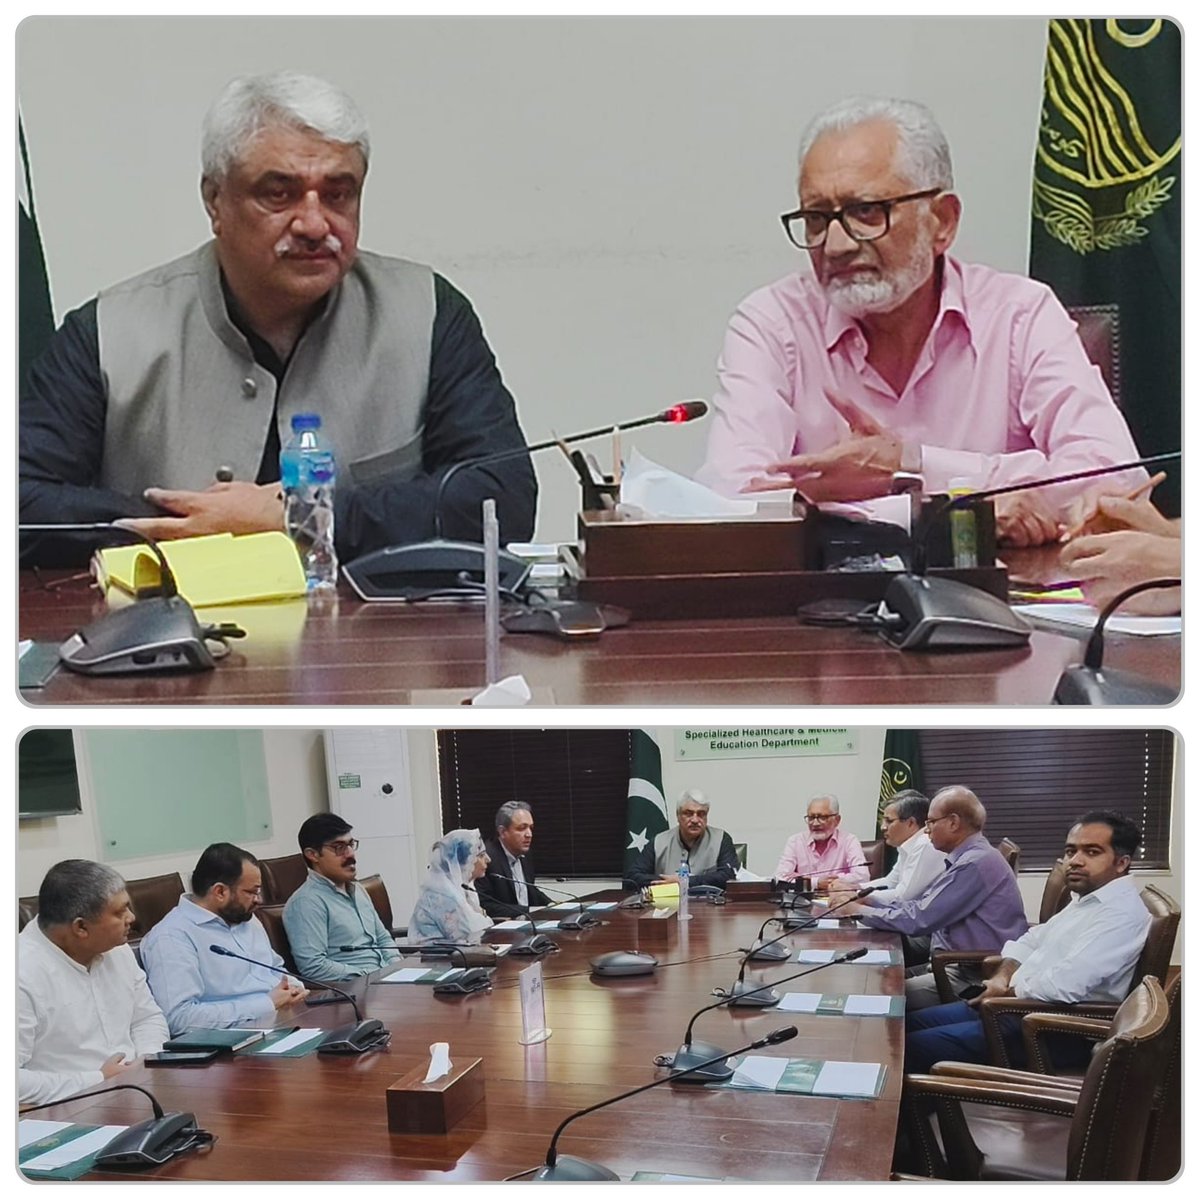 Former provincial health minister Dr. Javed Akram met with provincial health minister @SalmanRafiquePK at @SHCMEHealth Khawaja Salman Rafiq and Prof. Dr. Javed Akram discussed the measures regarding the treatment of patients suffering from heart diseases.